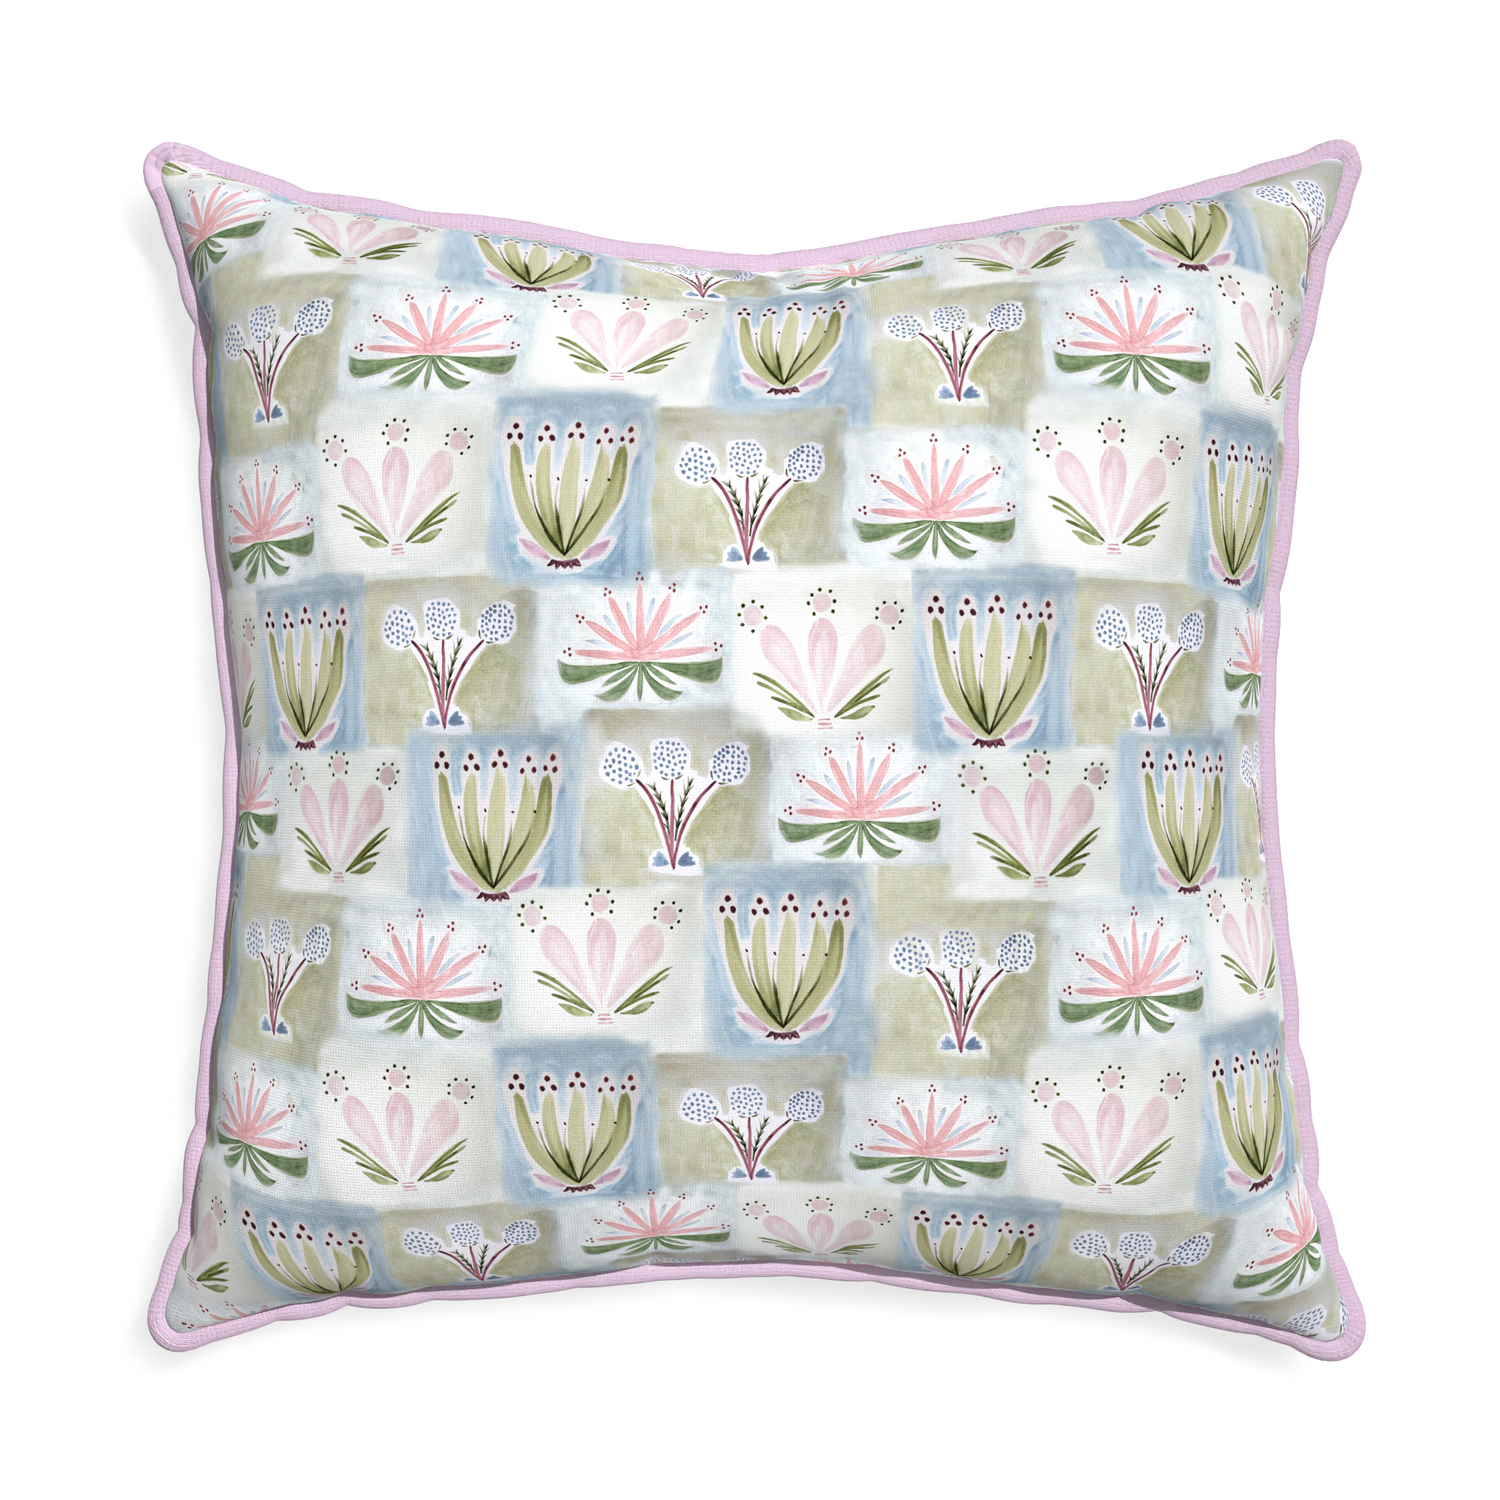 Euro-sham harper custom hand-painted floralpillow with l piping on white background